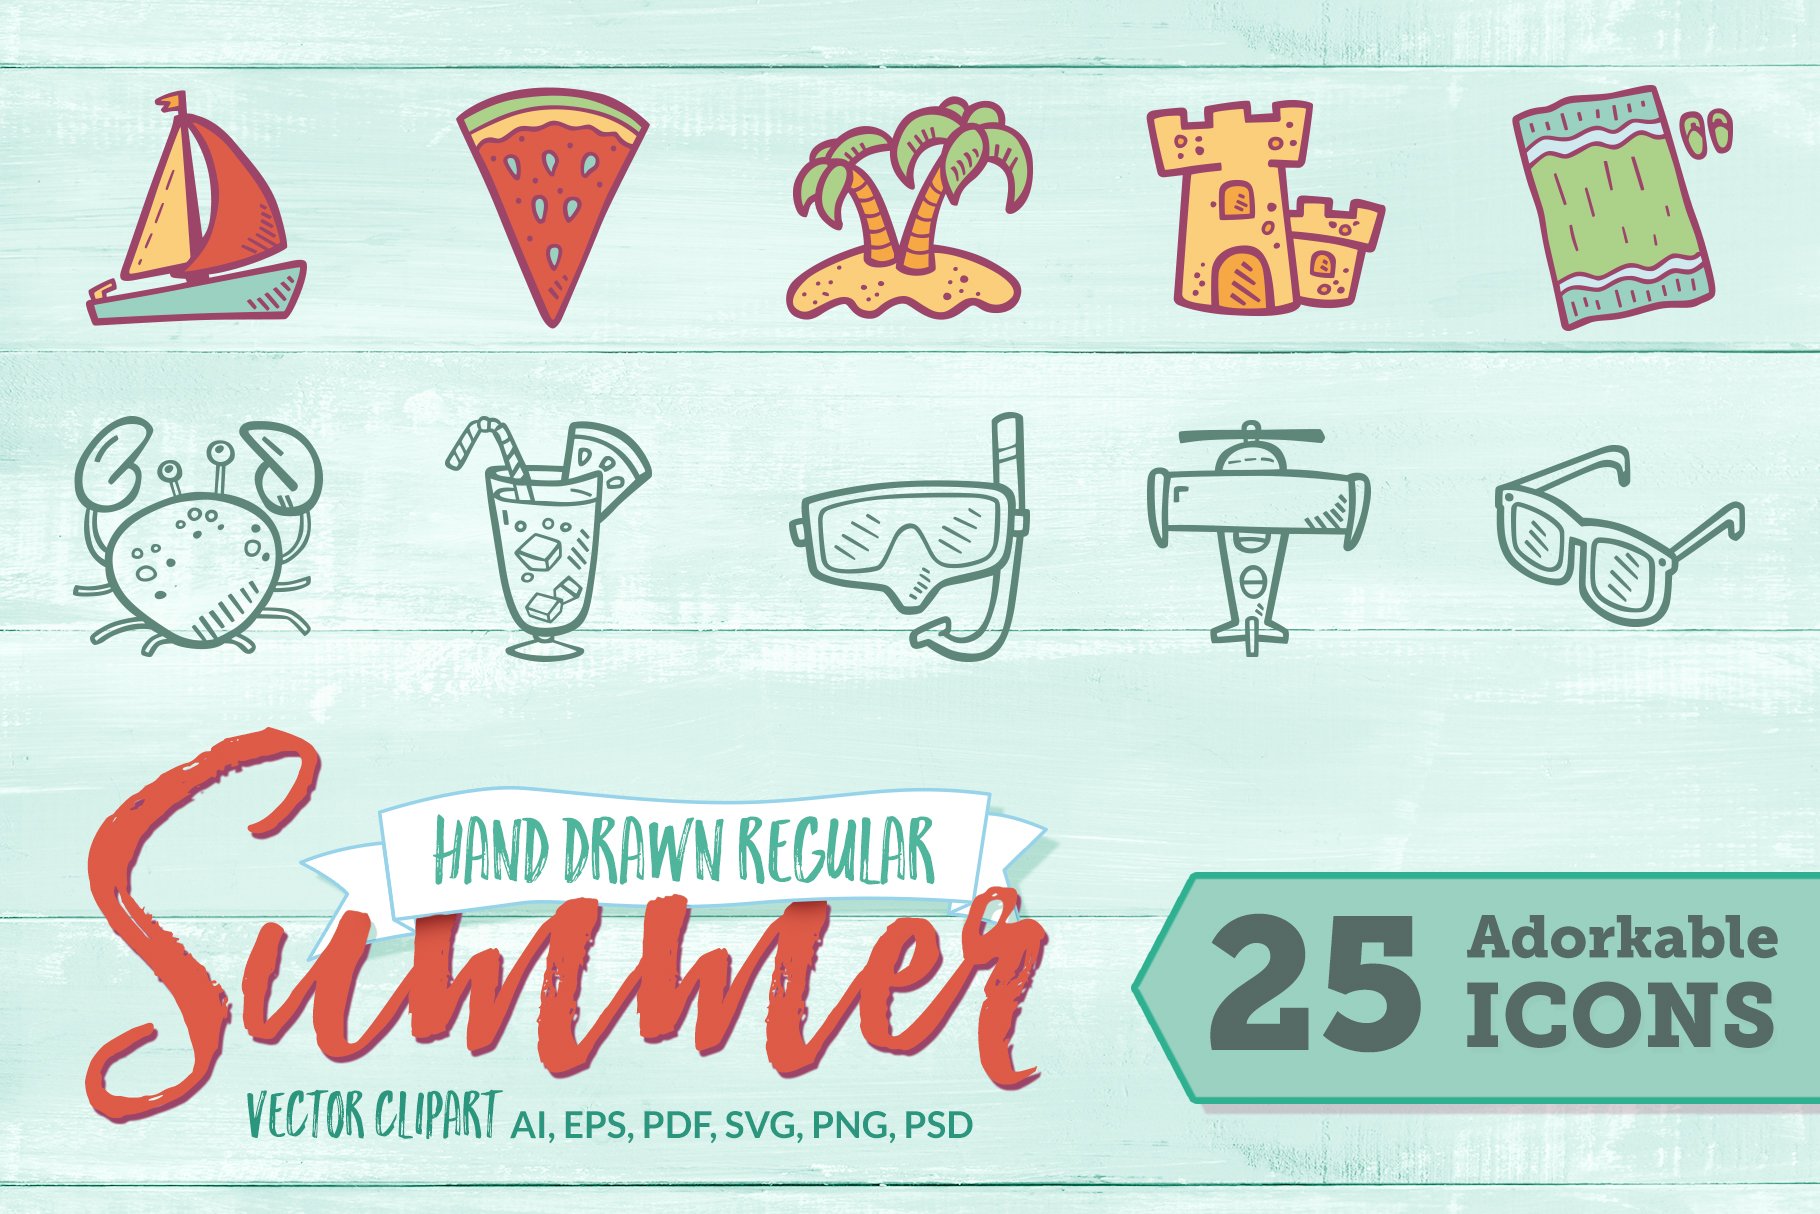 Summer Hand Drawn Icons - Regular cover image.